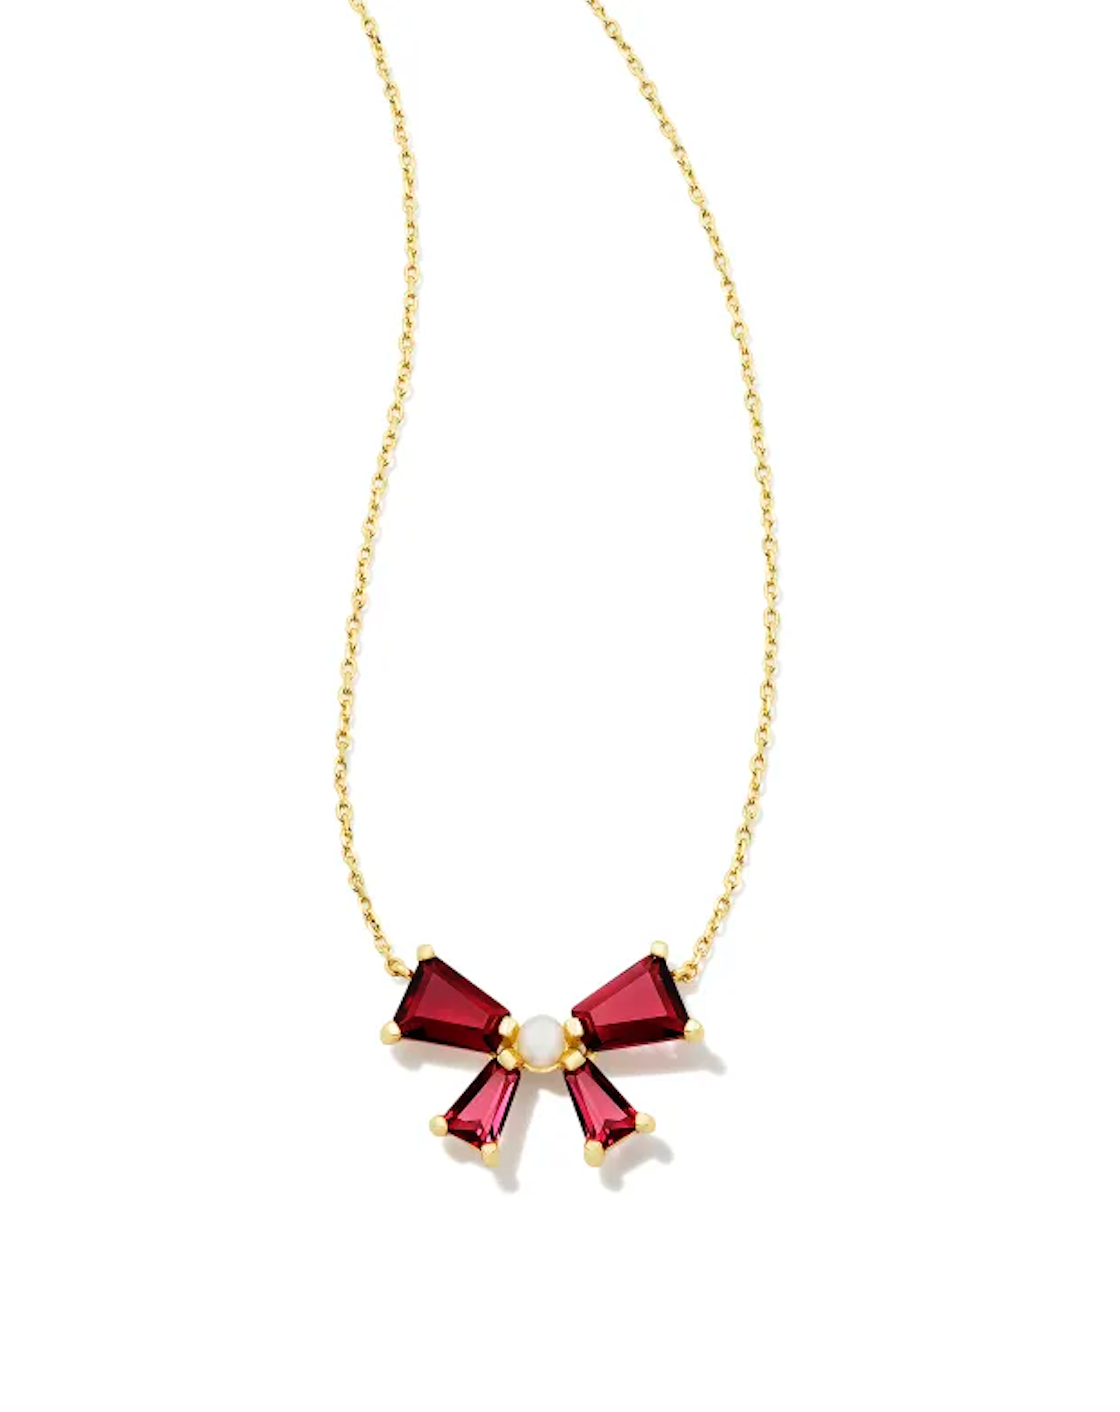 KENDRA SCOTT BLAIR GOLD BOW PENDANT NECKLACE IN RED MIX